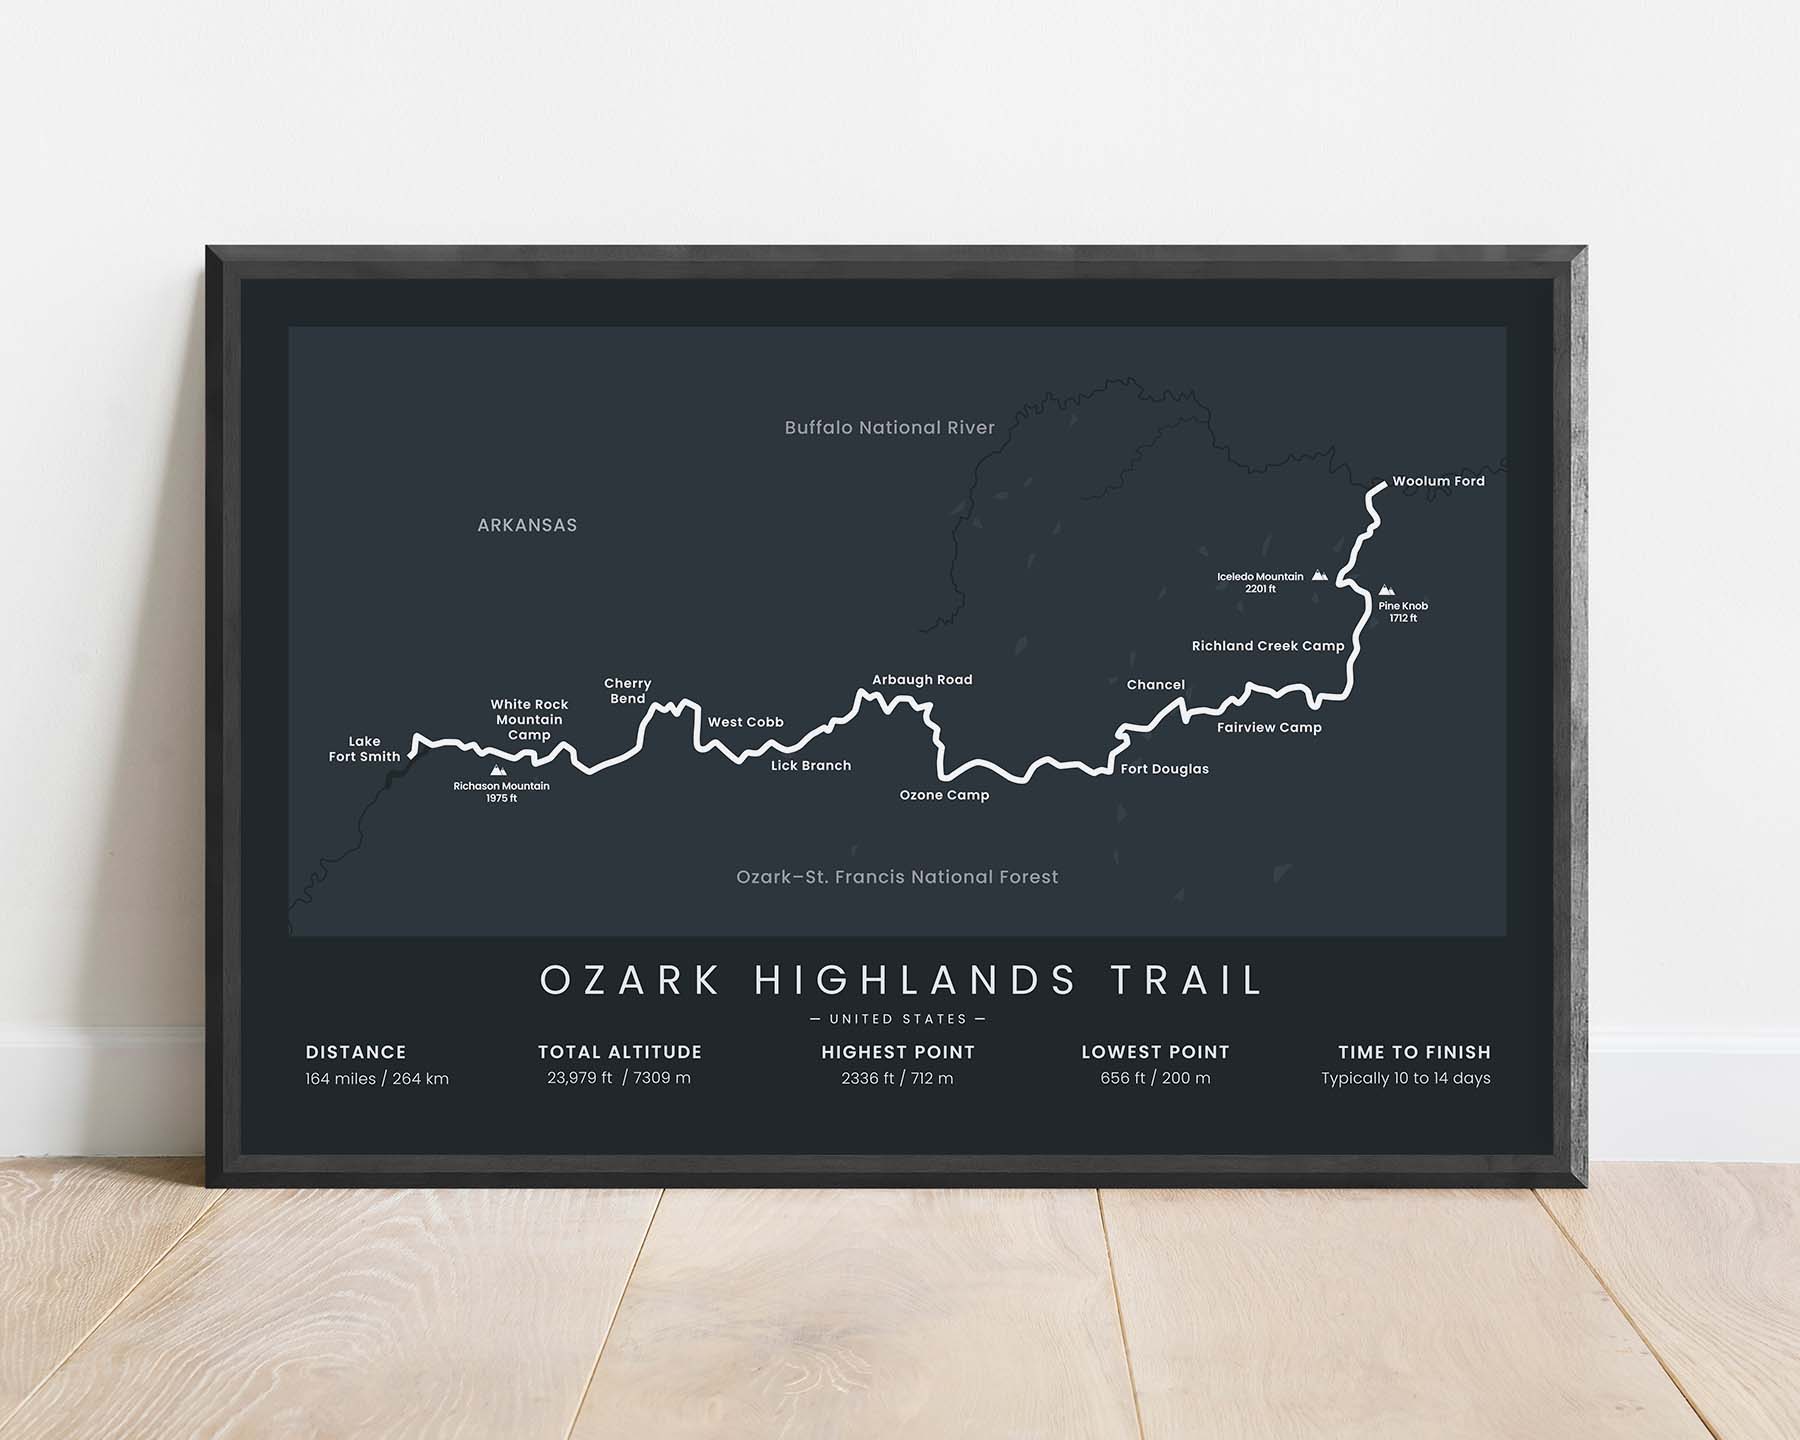 Ozark Highlands National Recreation Trail (United States, Ozark Mountains, Lake Fort Smith to Woolum Ford, Lake Fort Smith State Park to Buffalo National River, Arkansas) Path Wall Art with Black Background